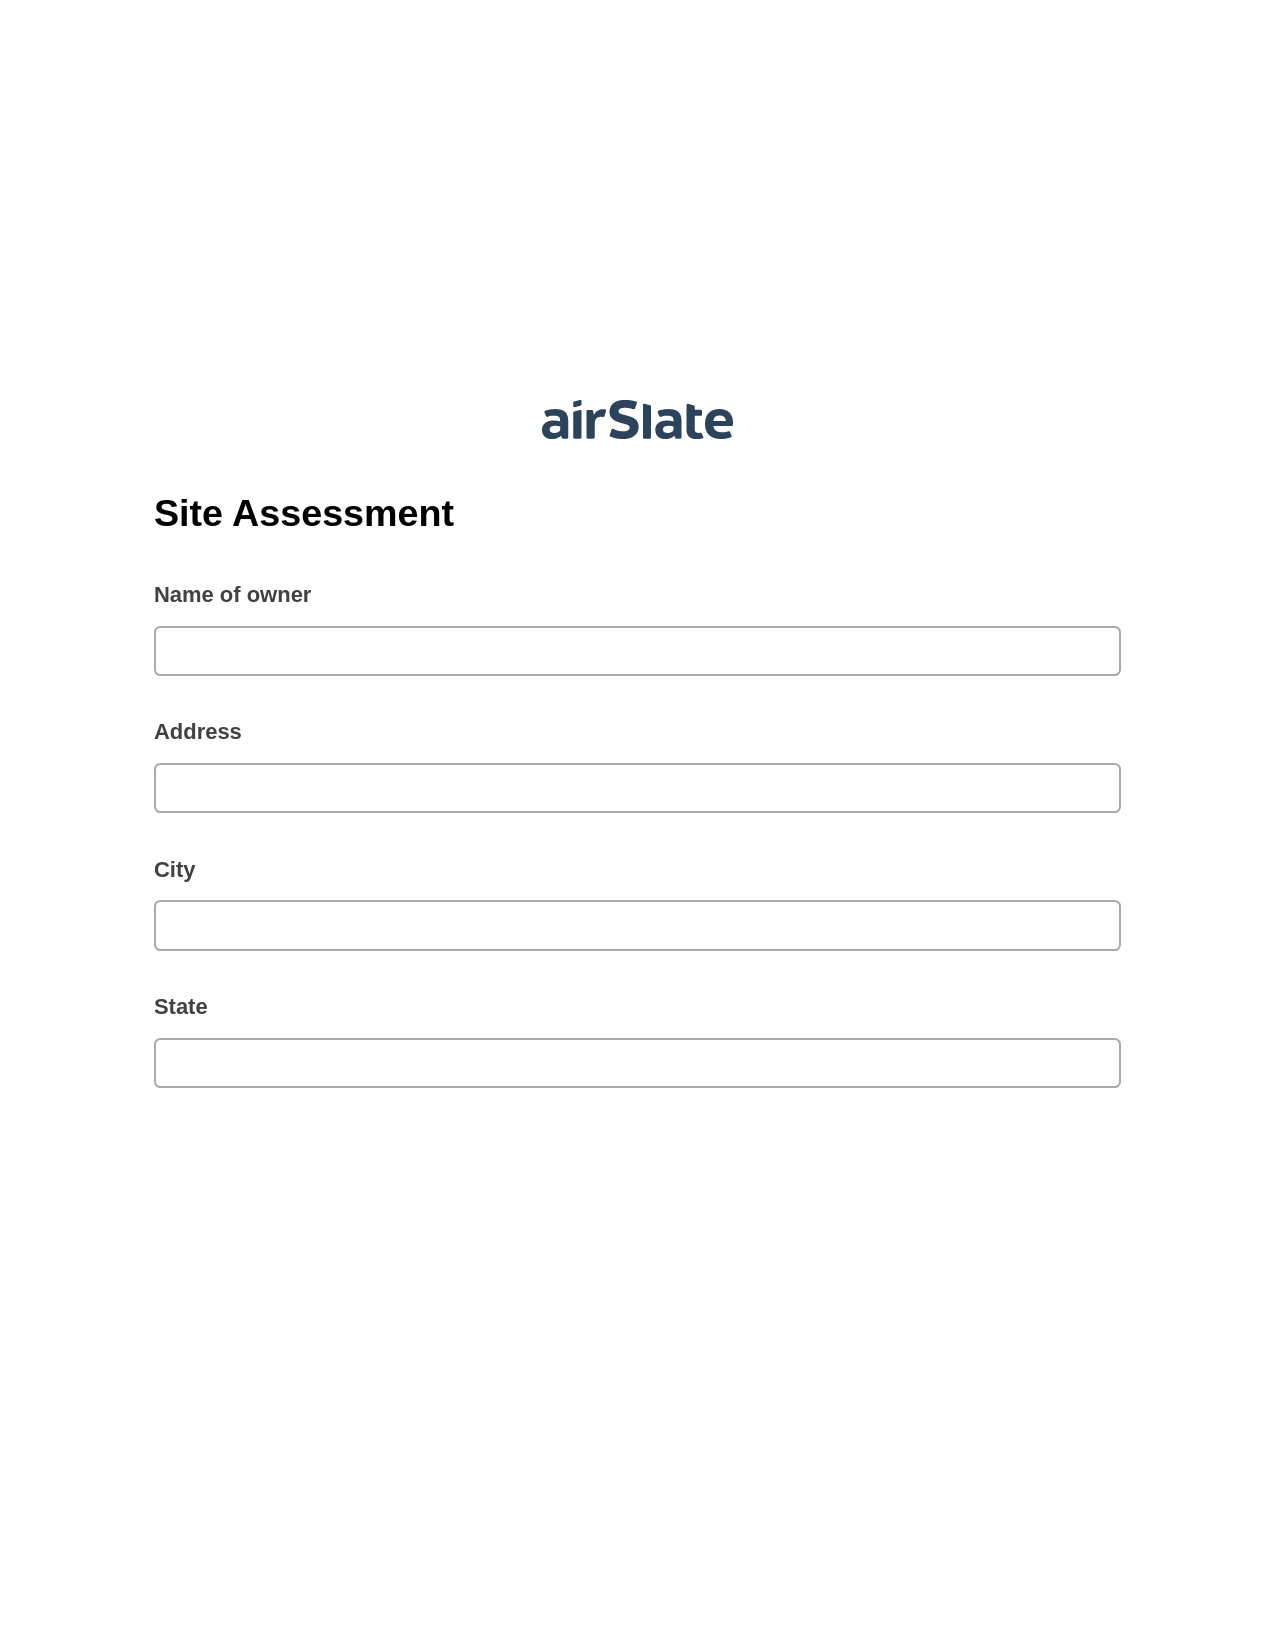 Multirole Site Assessment Pre-fill Slate from MS Dynamics 365 Records Bot, Unassign Role Bot, Archive to SharePoint Folder Bot